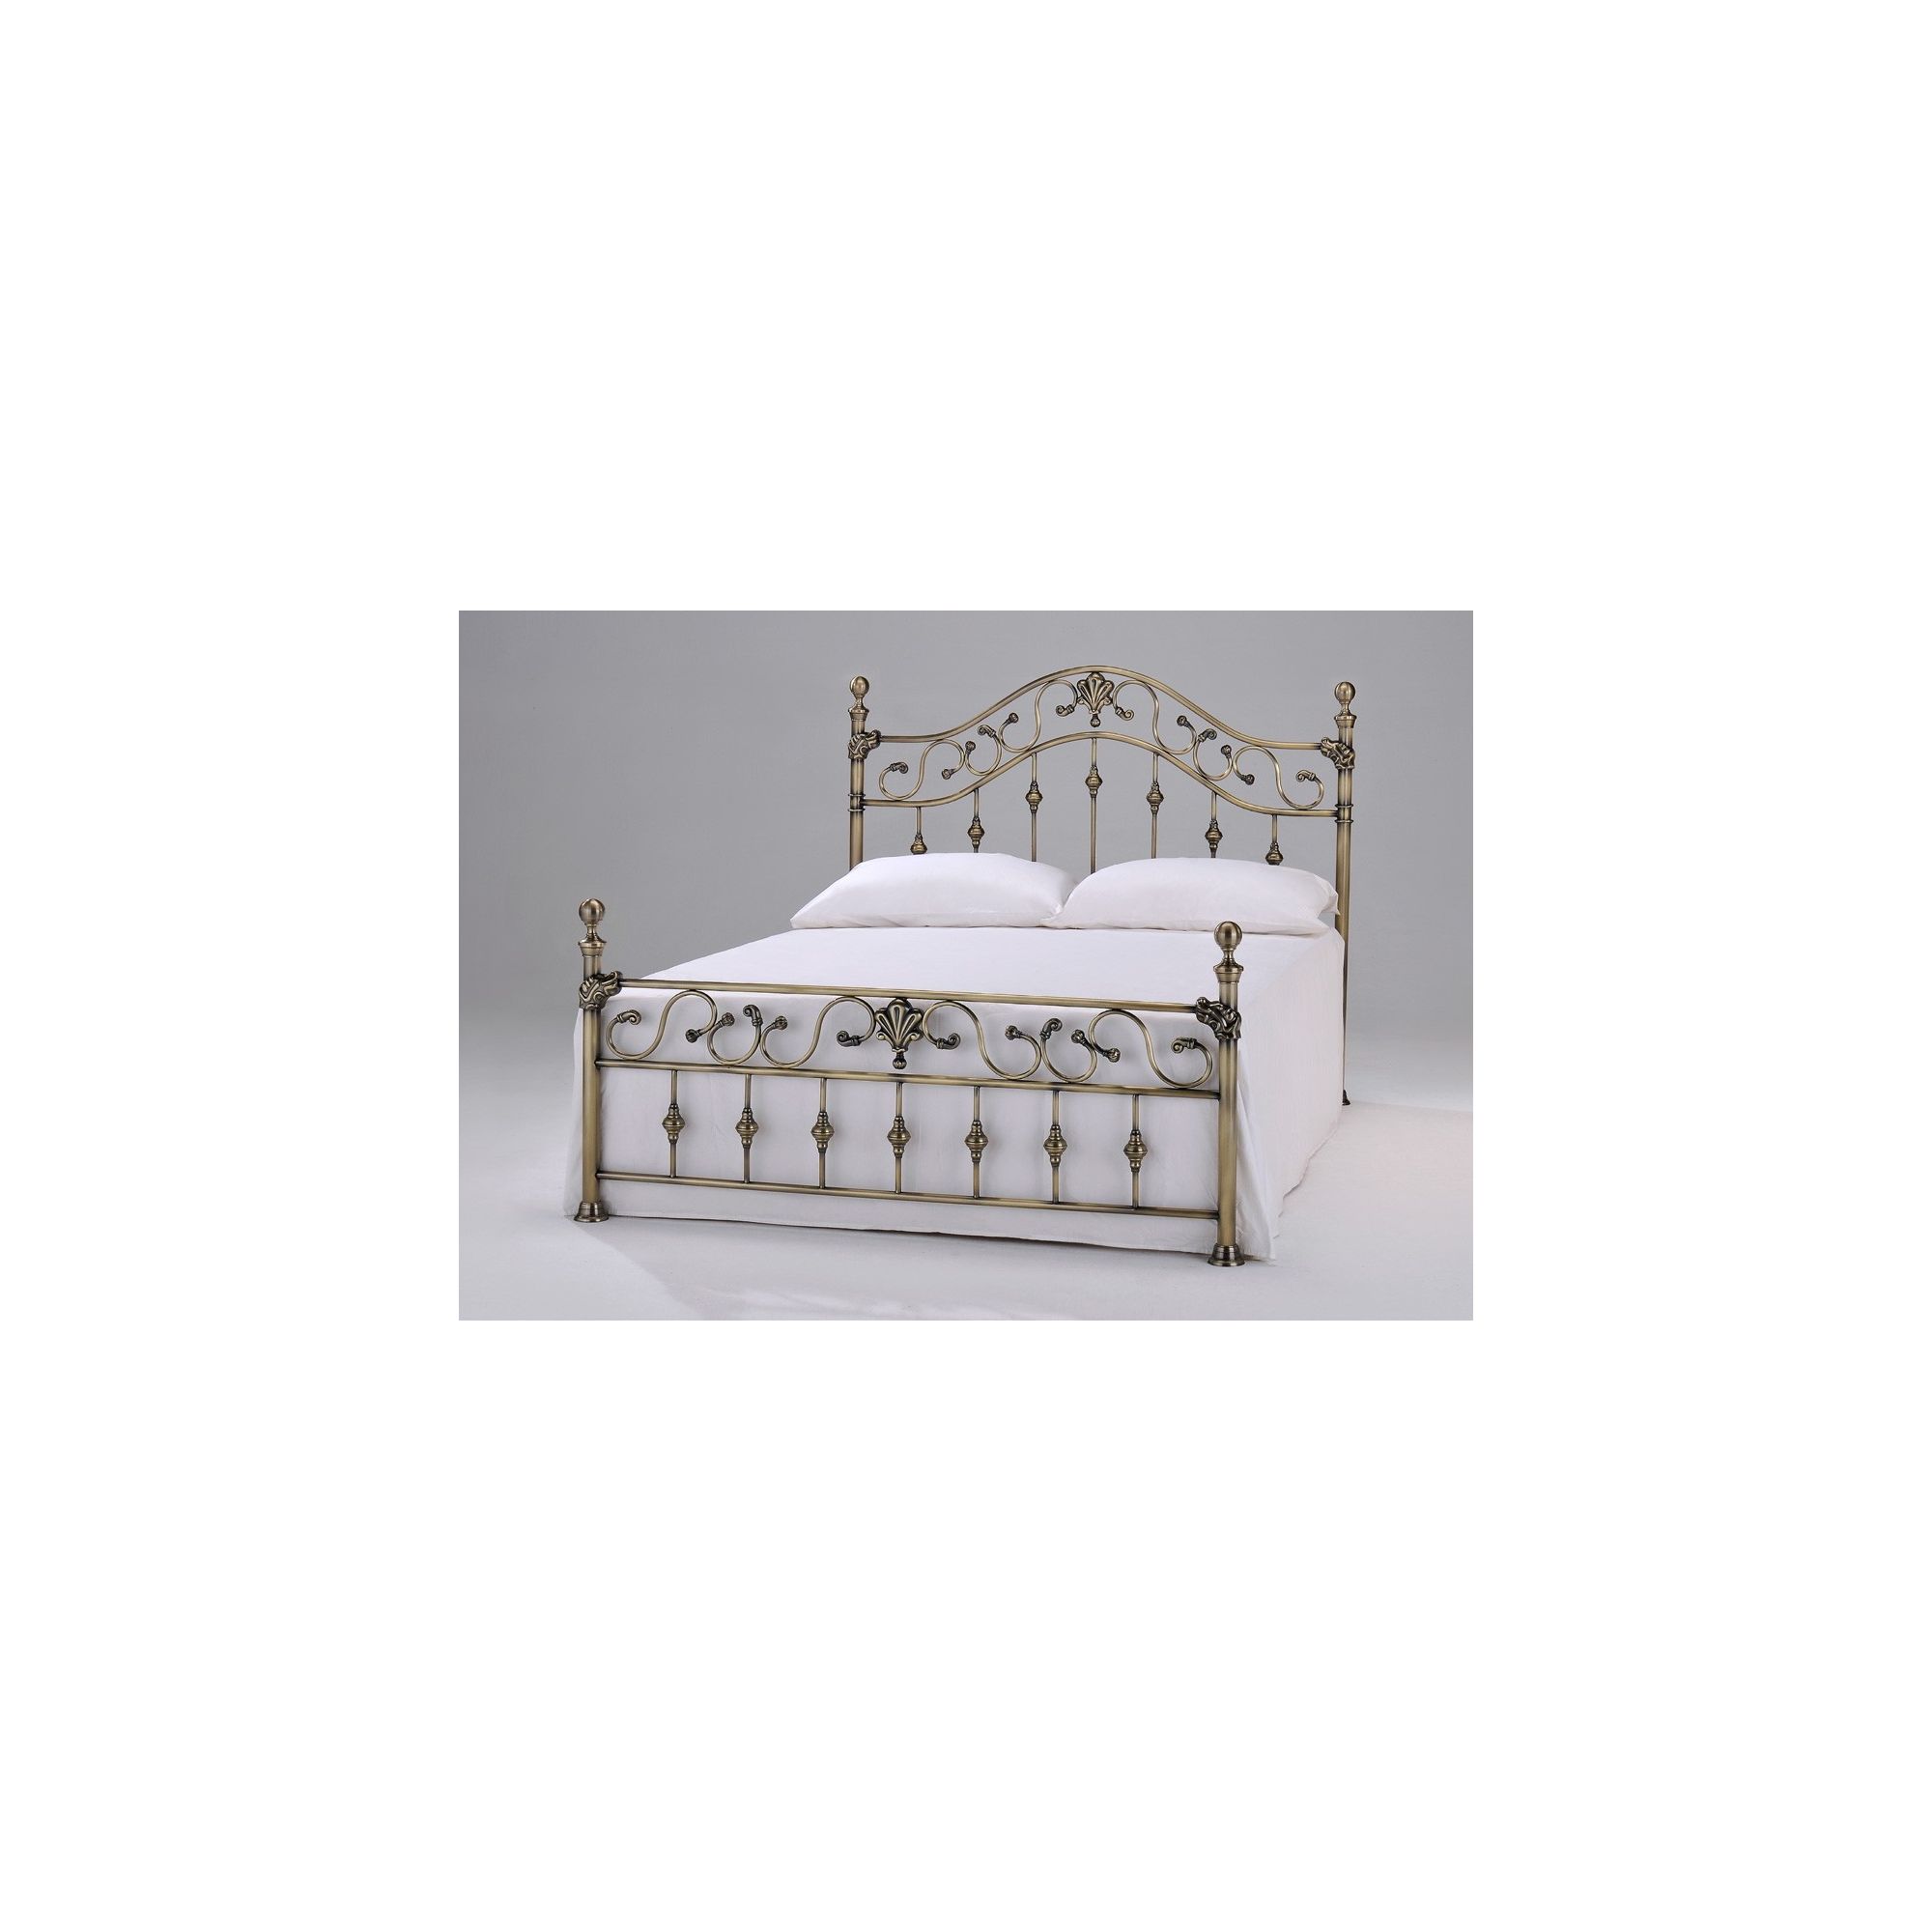 Interiors 2 suit Elizabeth Brass Bed - Double - Crystal at Tesco Direct